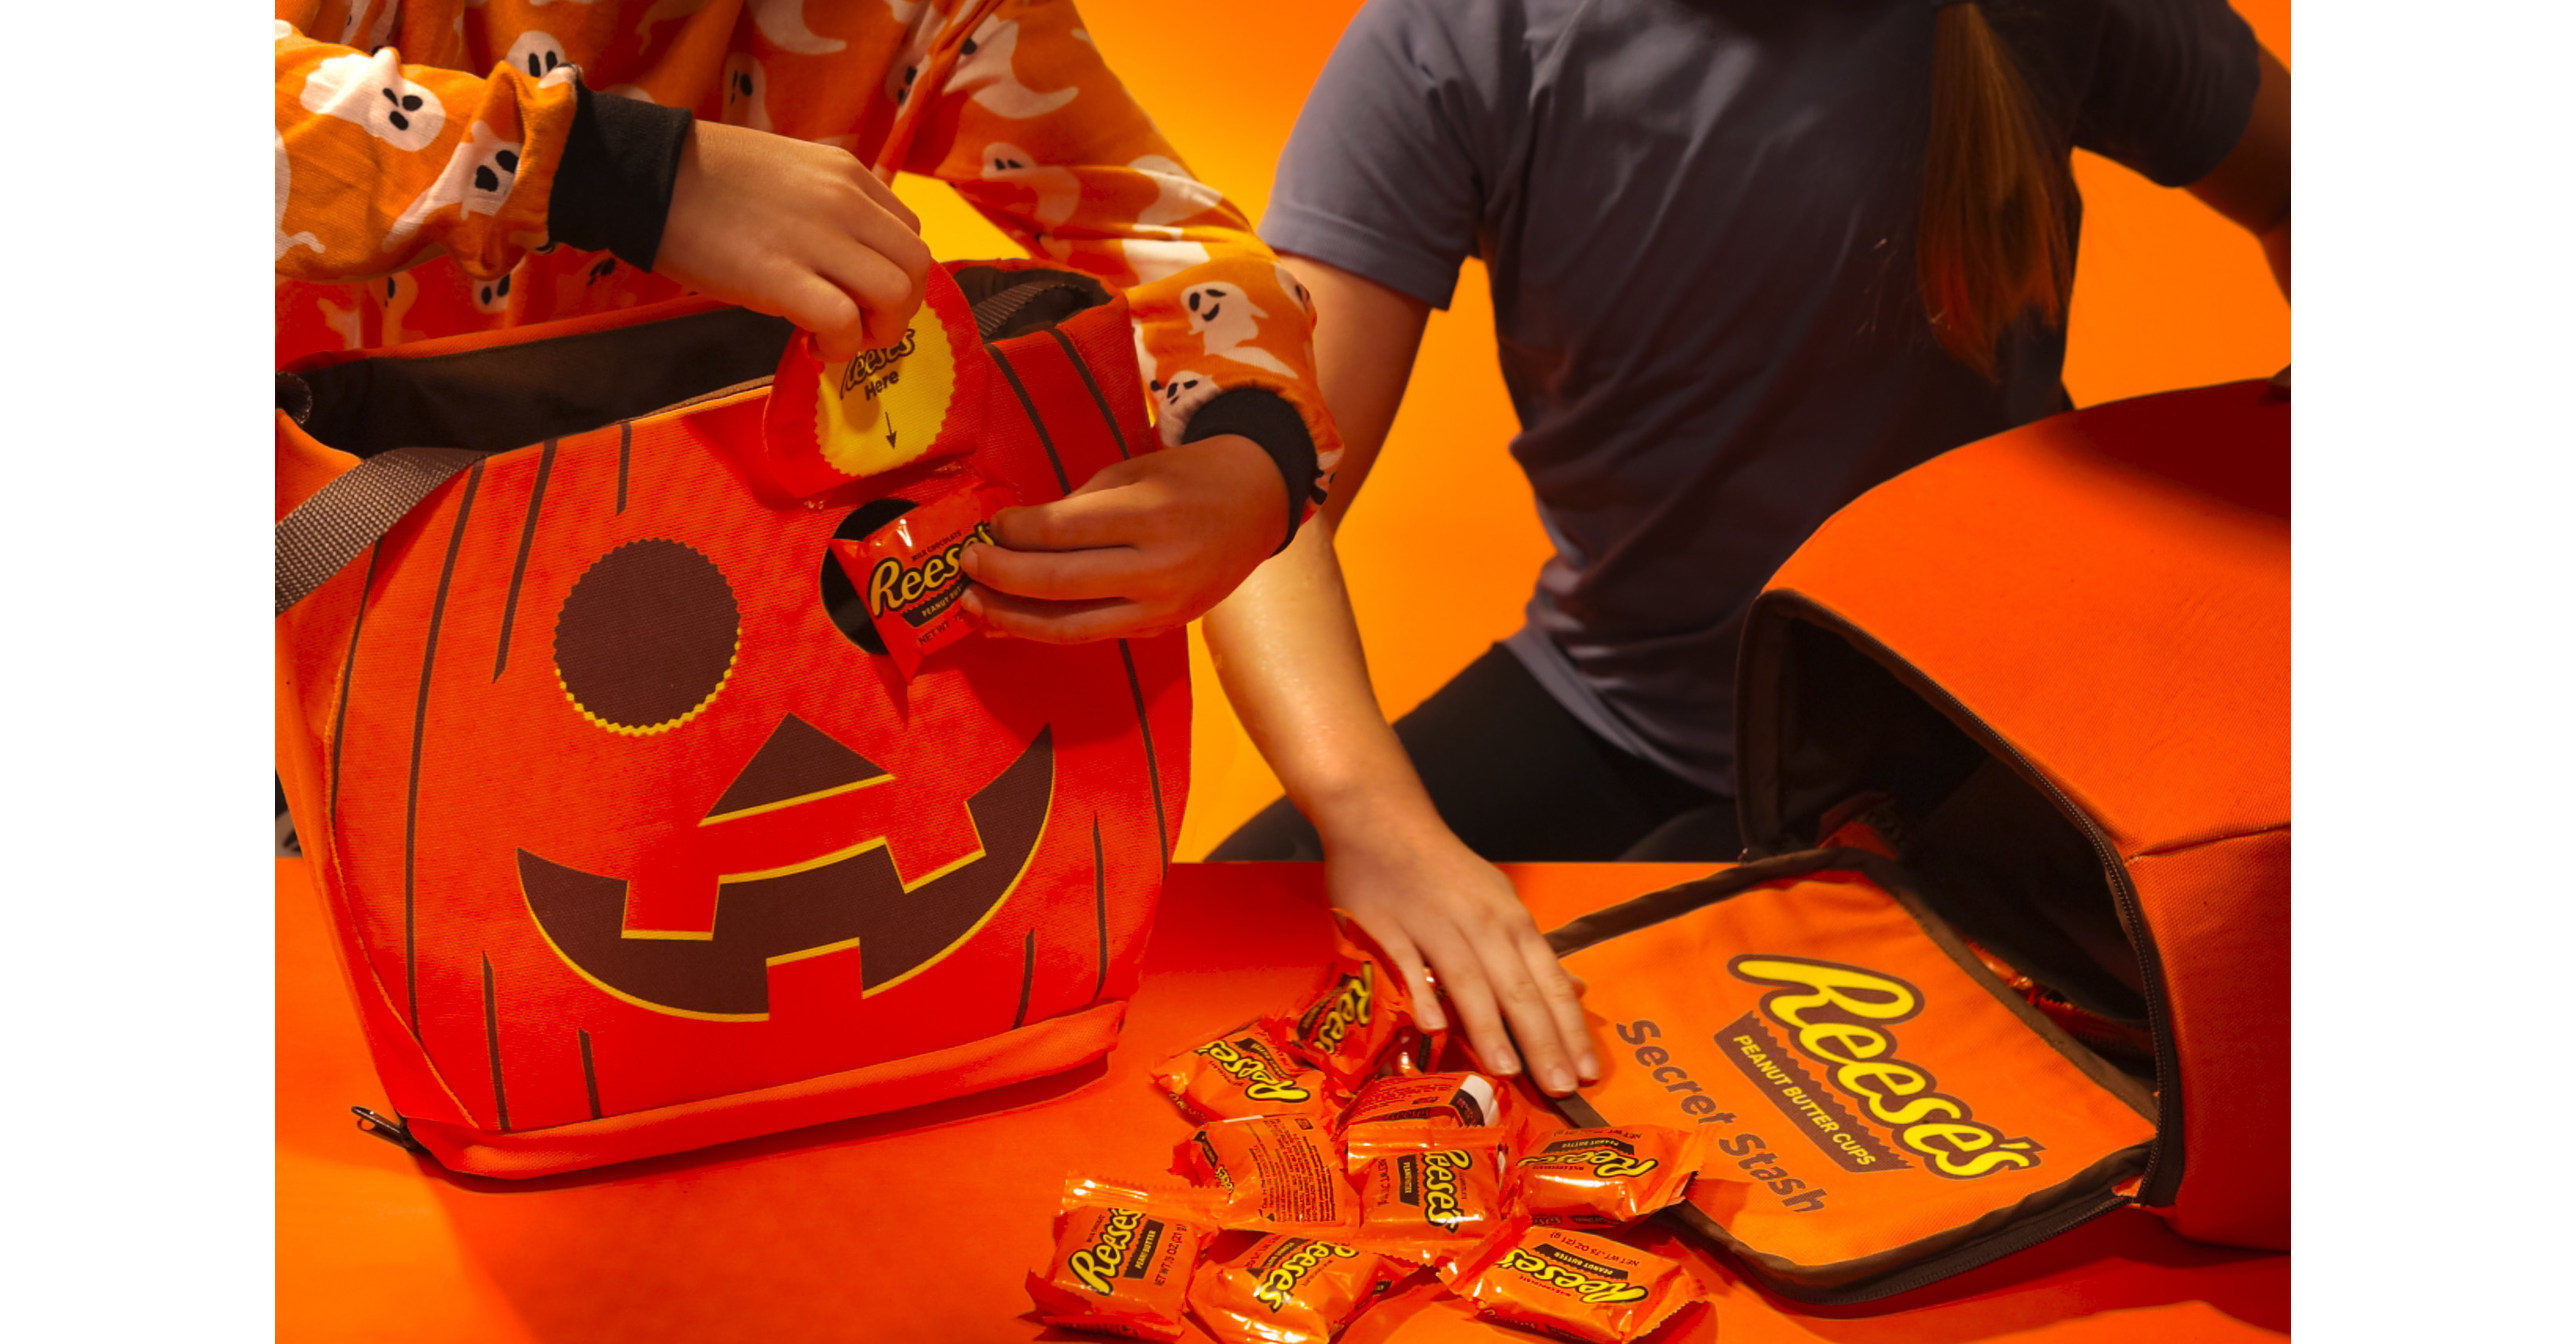 Protect Your Reese's Candy This Halloween with the Reese's Secret Stash Trick-or-Treat Bag